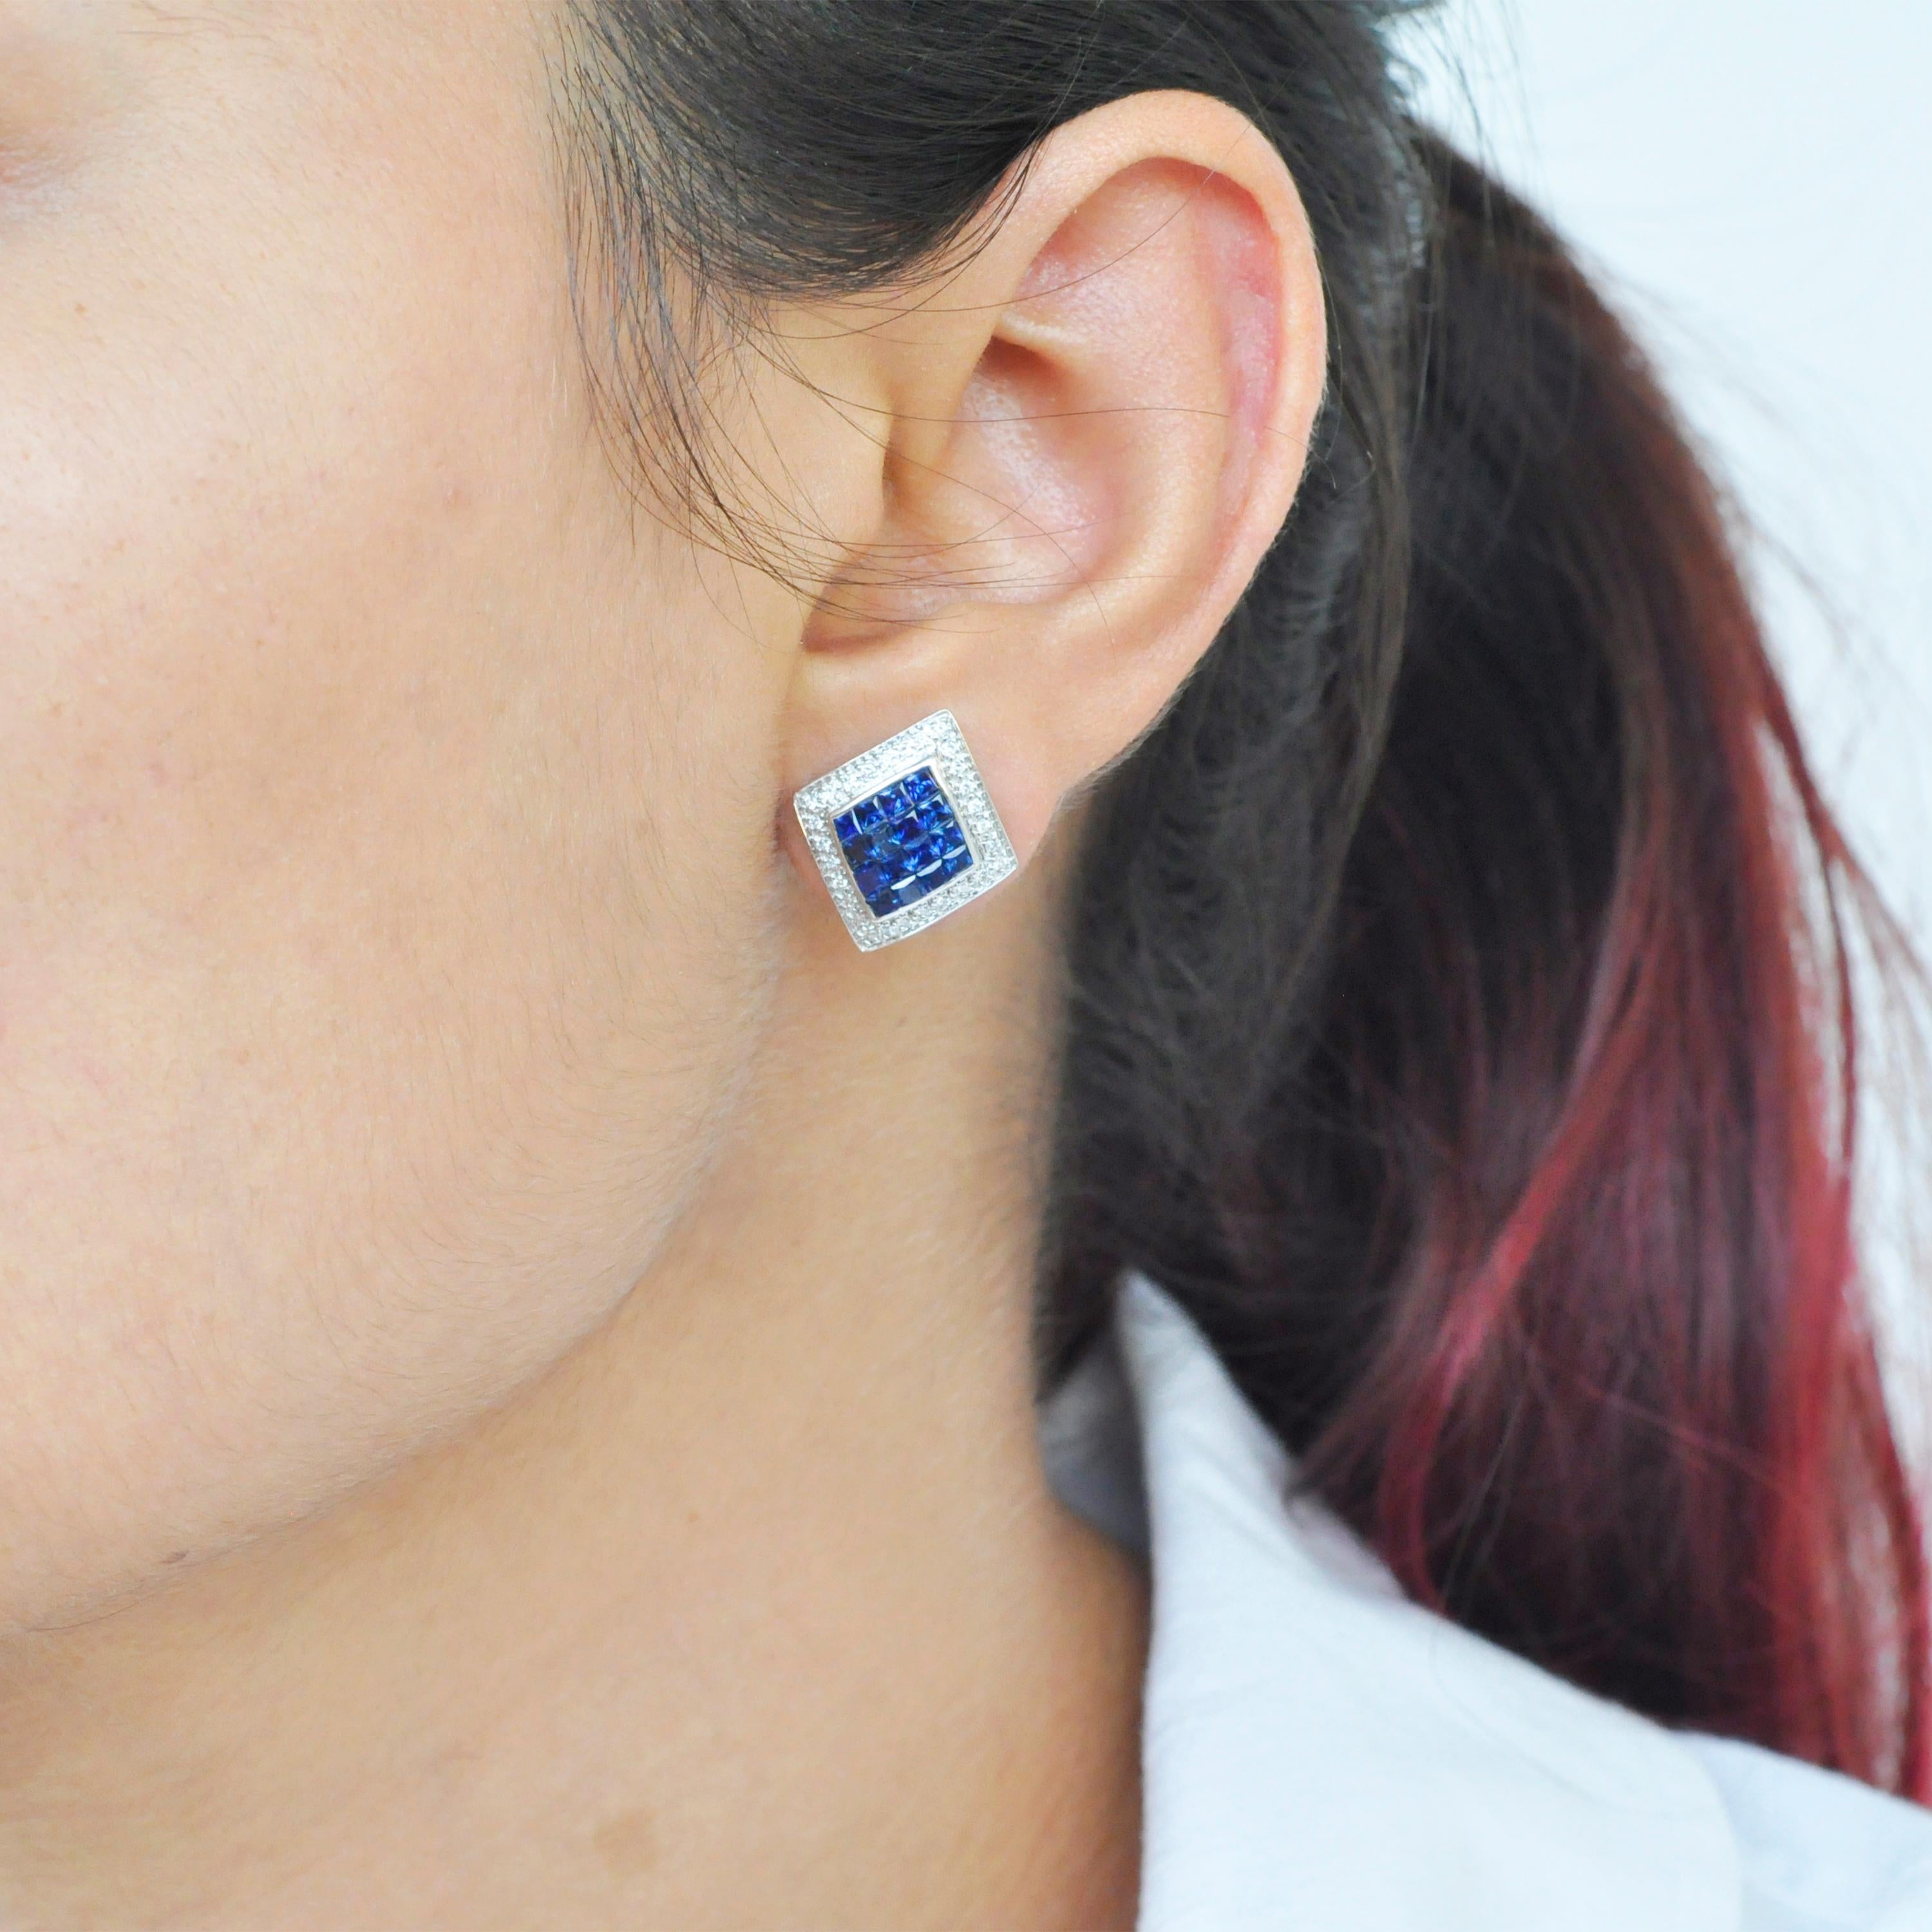 18 karat white gold invisible setting 5.76 carats sapphire diamond stud earrings.

This incredible royal blue sapphire and diamond stud earring is mesmerizing. The impressive no metal setting of the three perfect rows of princess cut sapphires